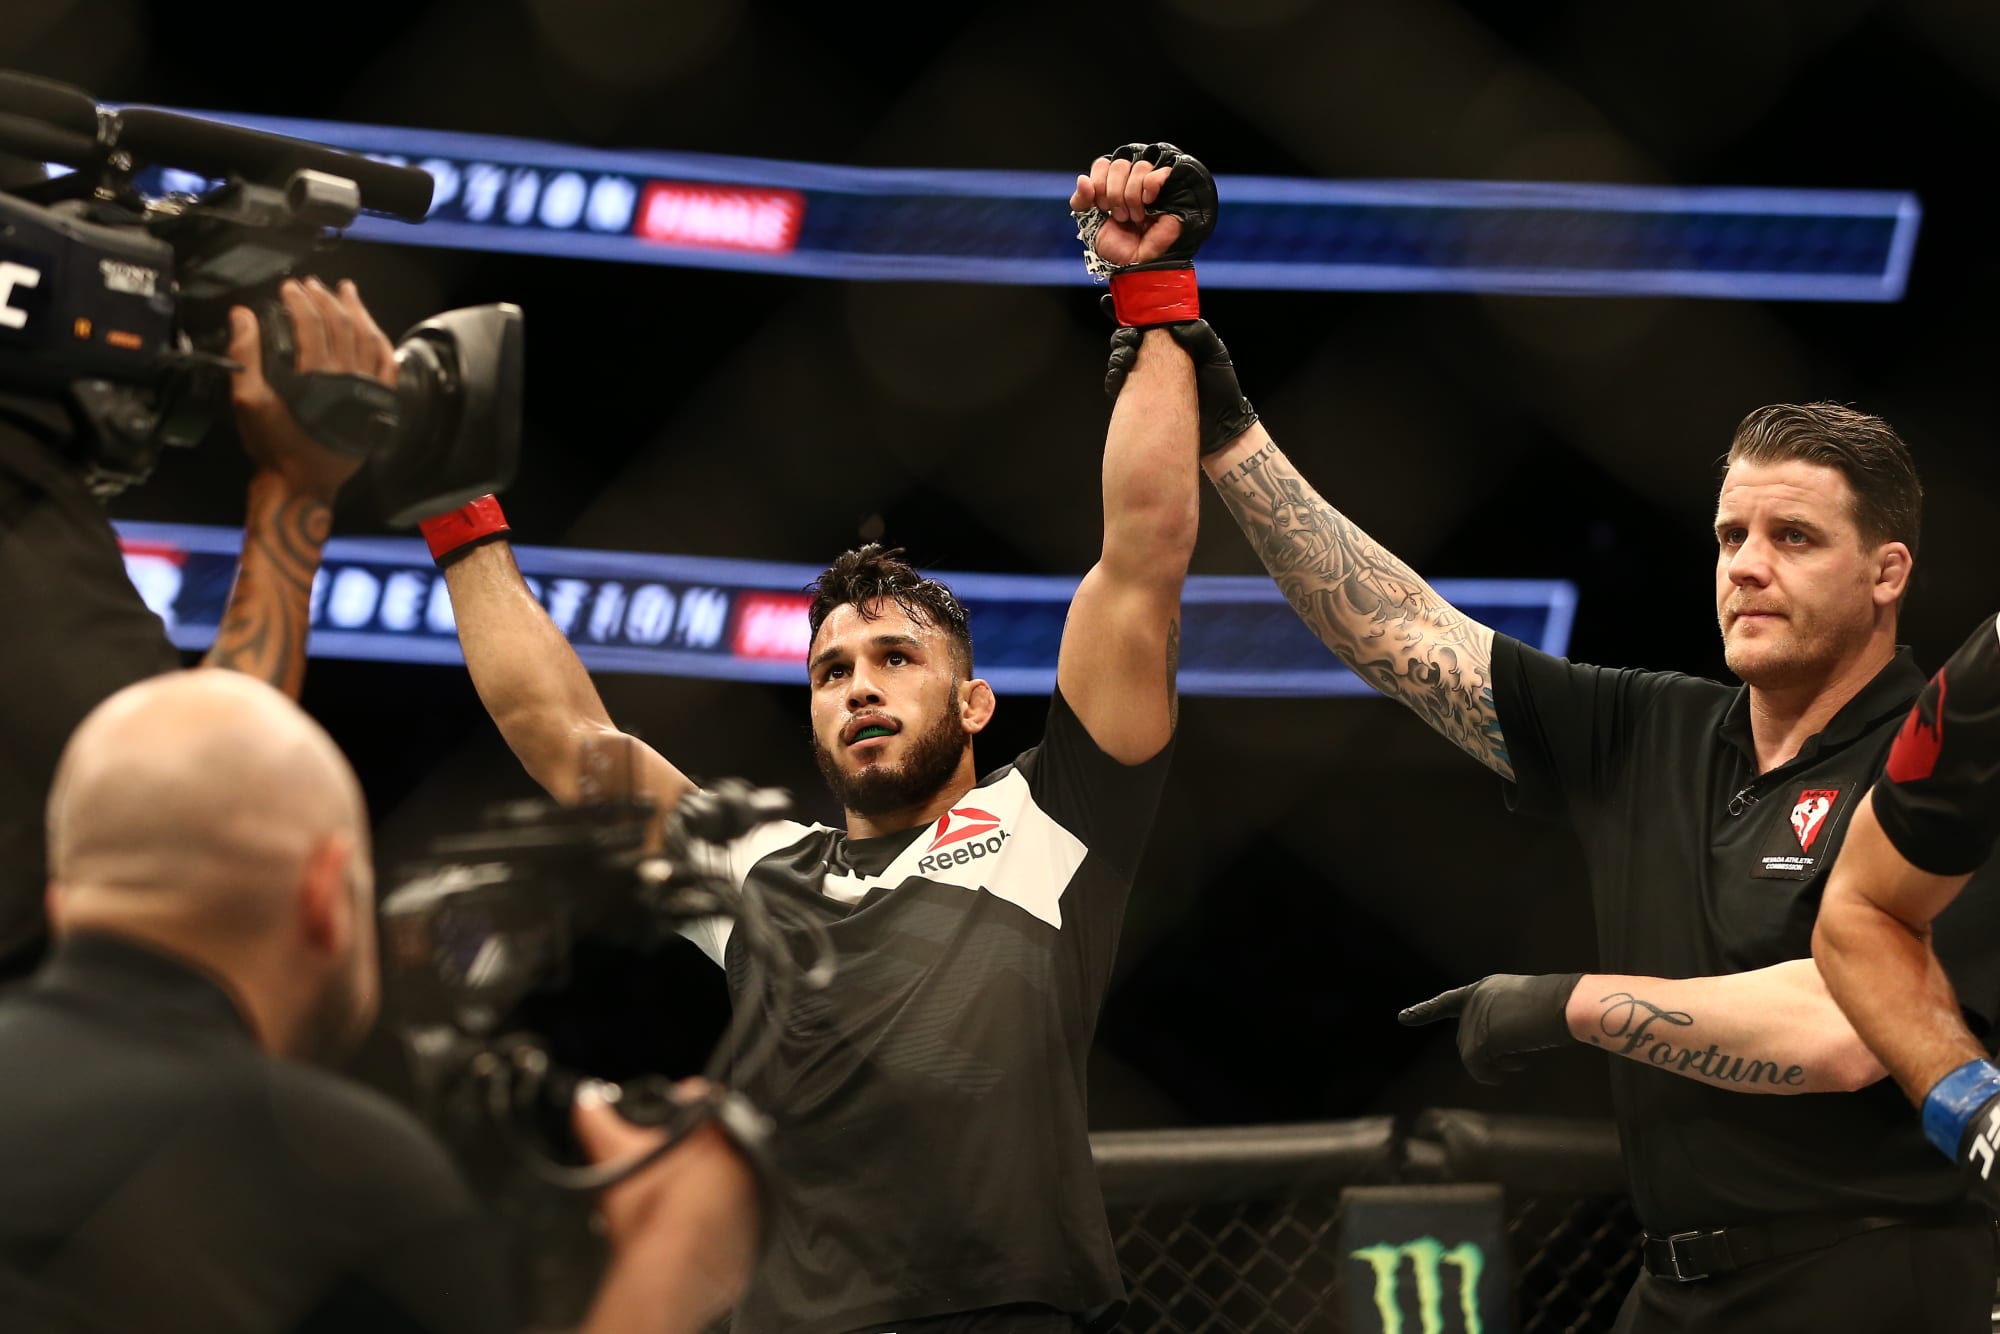 UFC TUF 25 finale results Tavares takes the decision over Theodorou